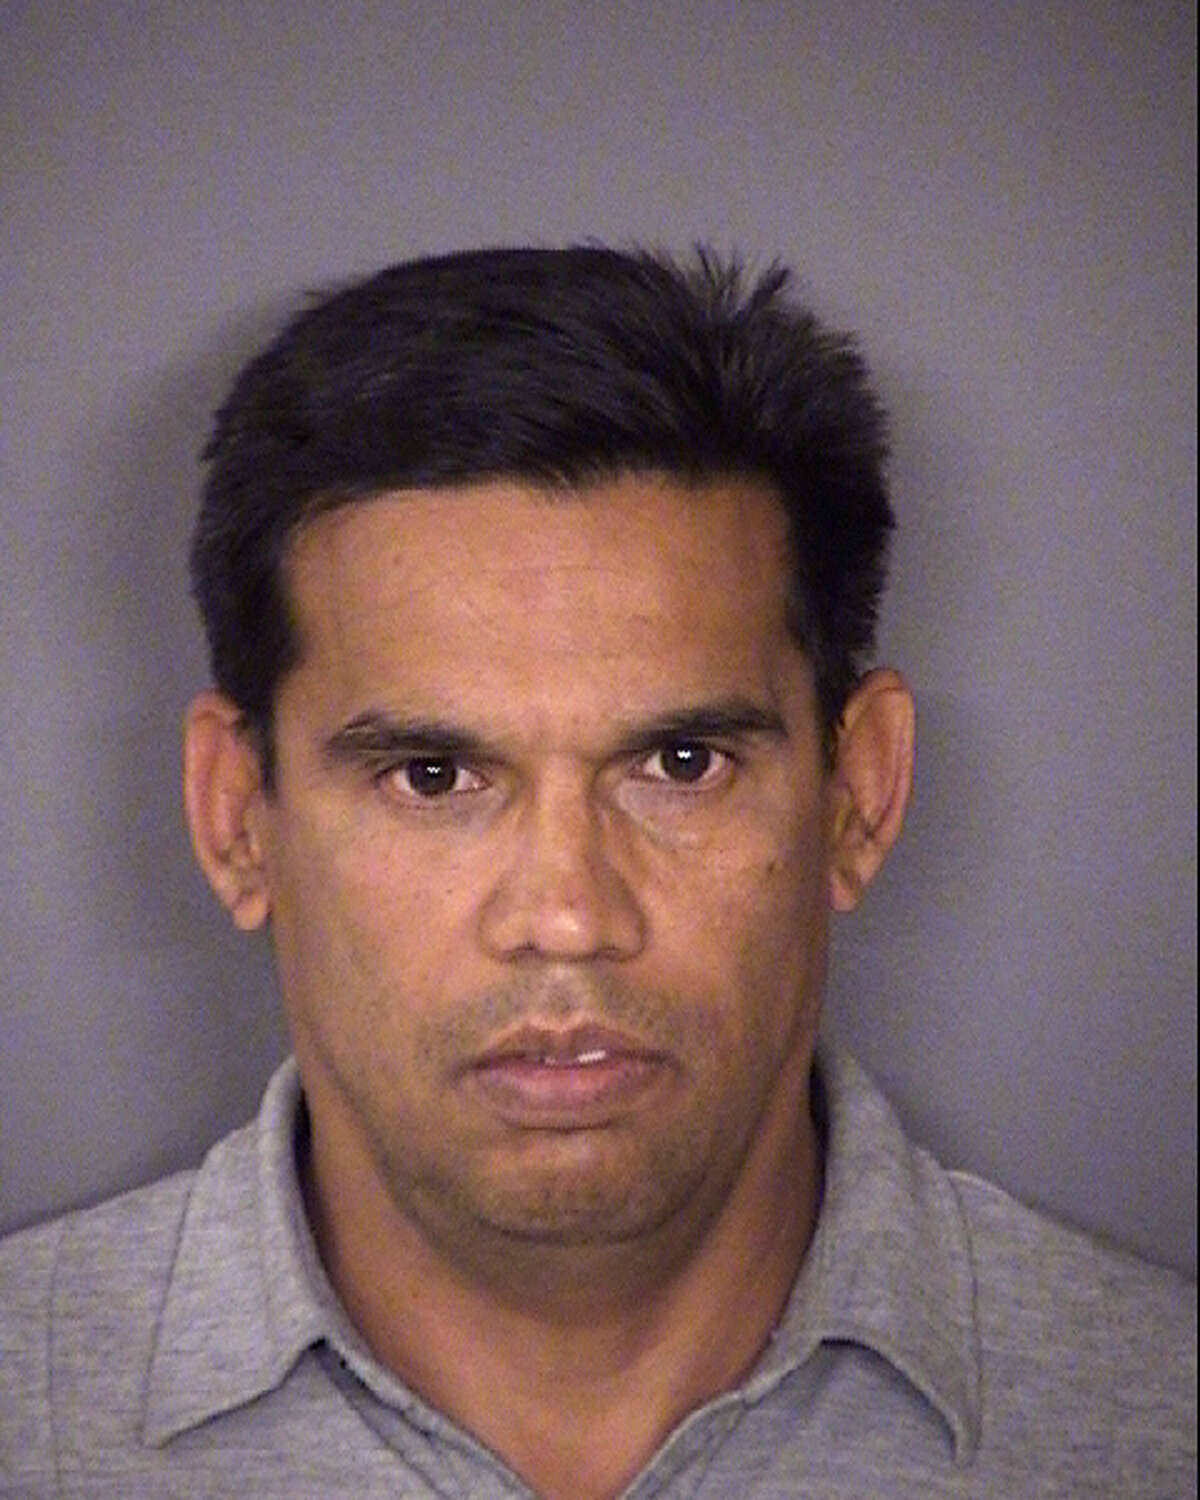 Jeffrey Ramos, 48, was arrested on Saturday on a charge of continuous sexual abuse of a child, according to the Bexar County Sheriff's Office.